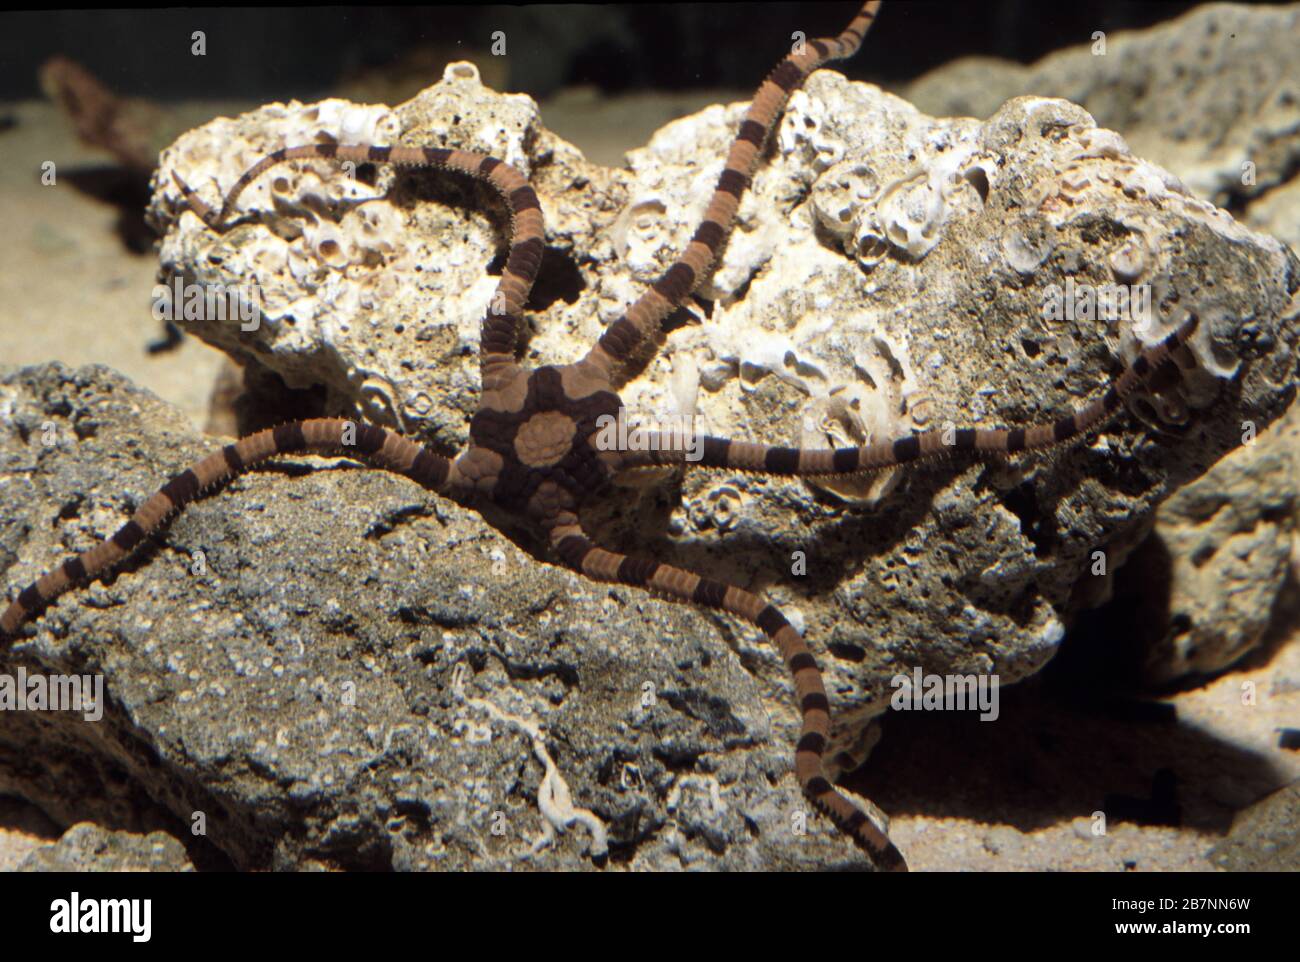 Banded brittle star, Ophiolepis superba Stock Photo